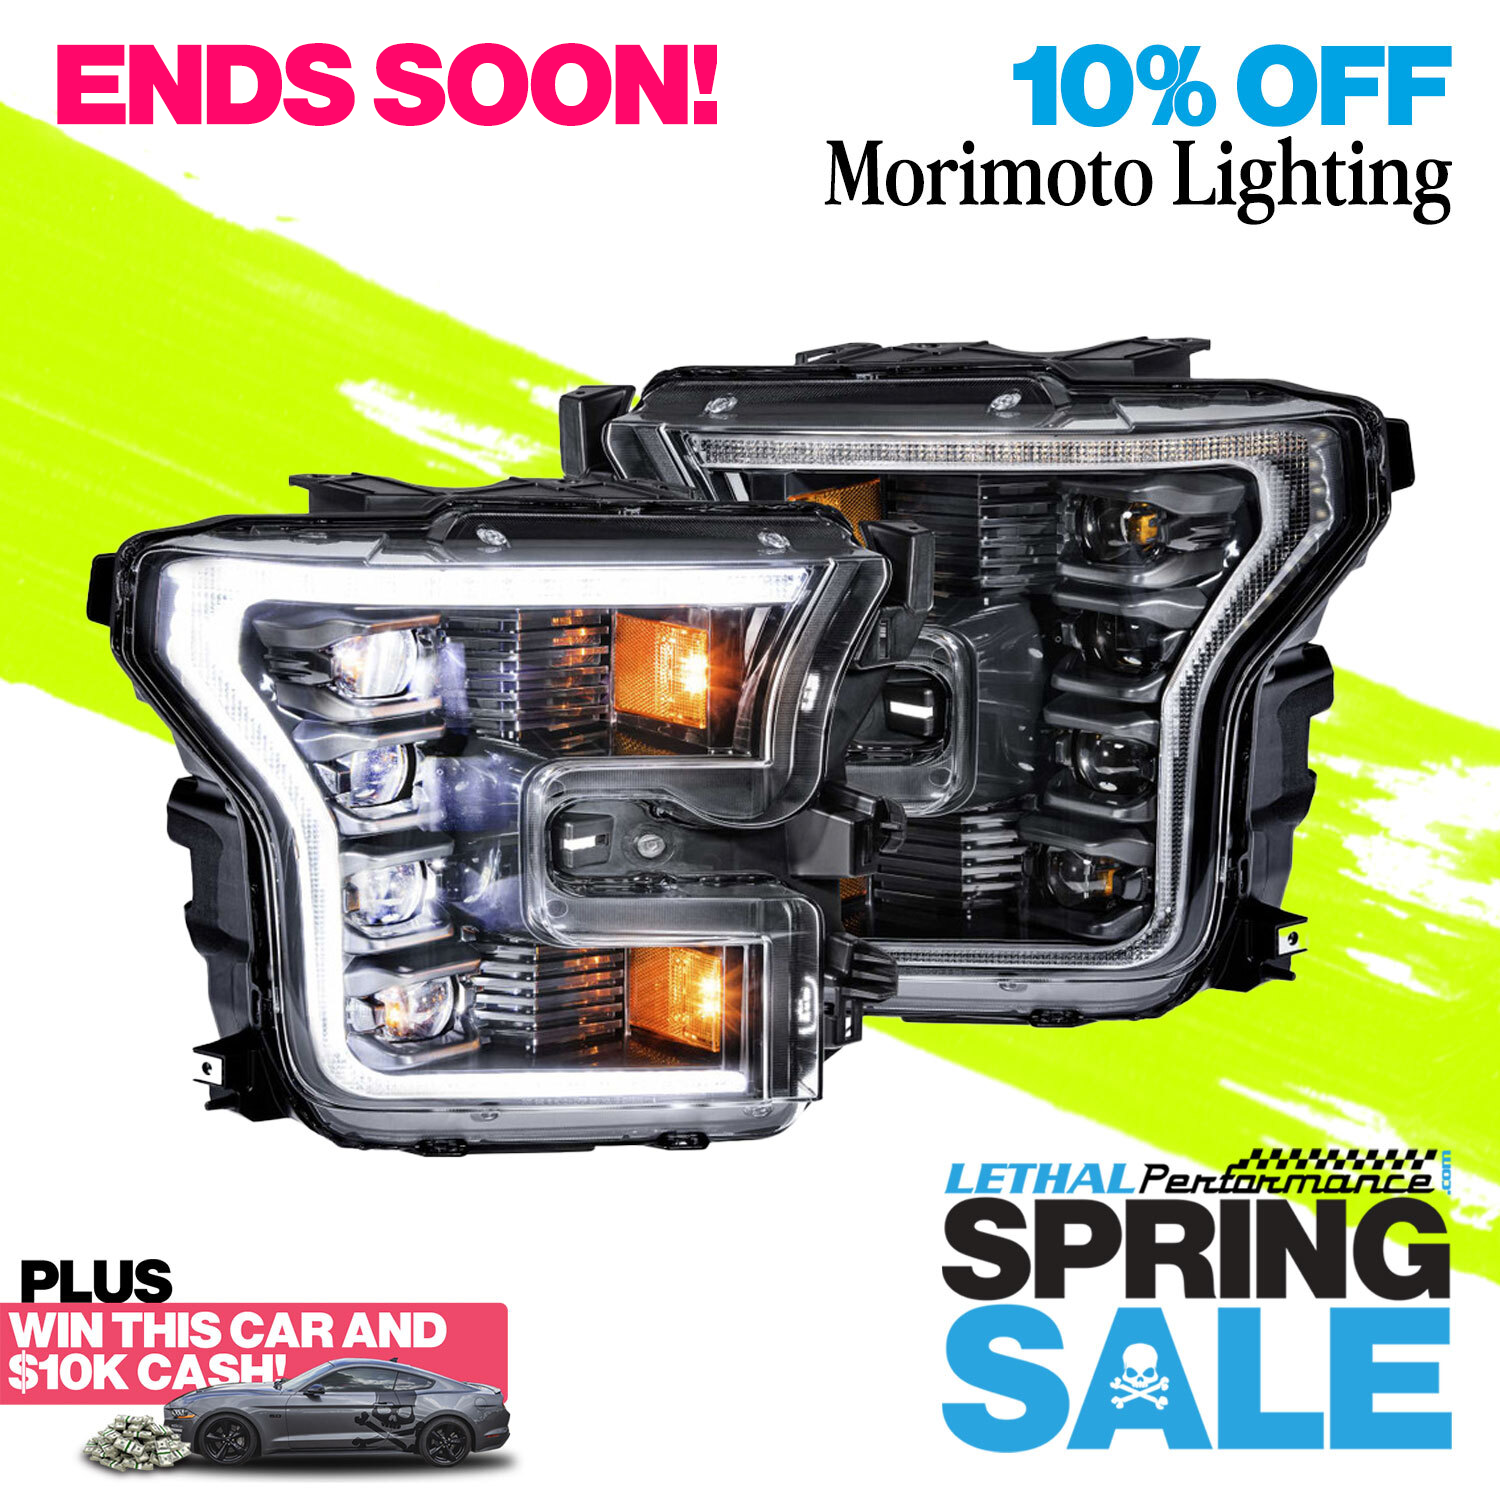 mori f150 end soon spring sale.png